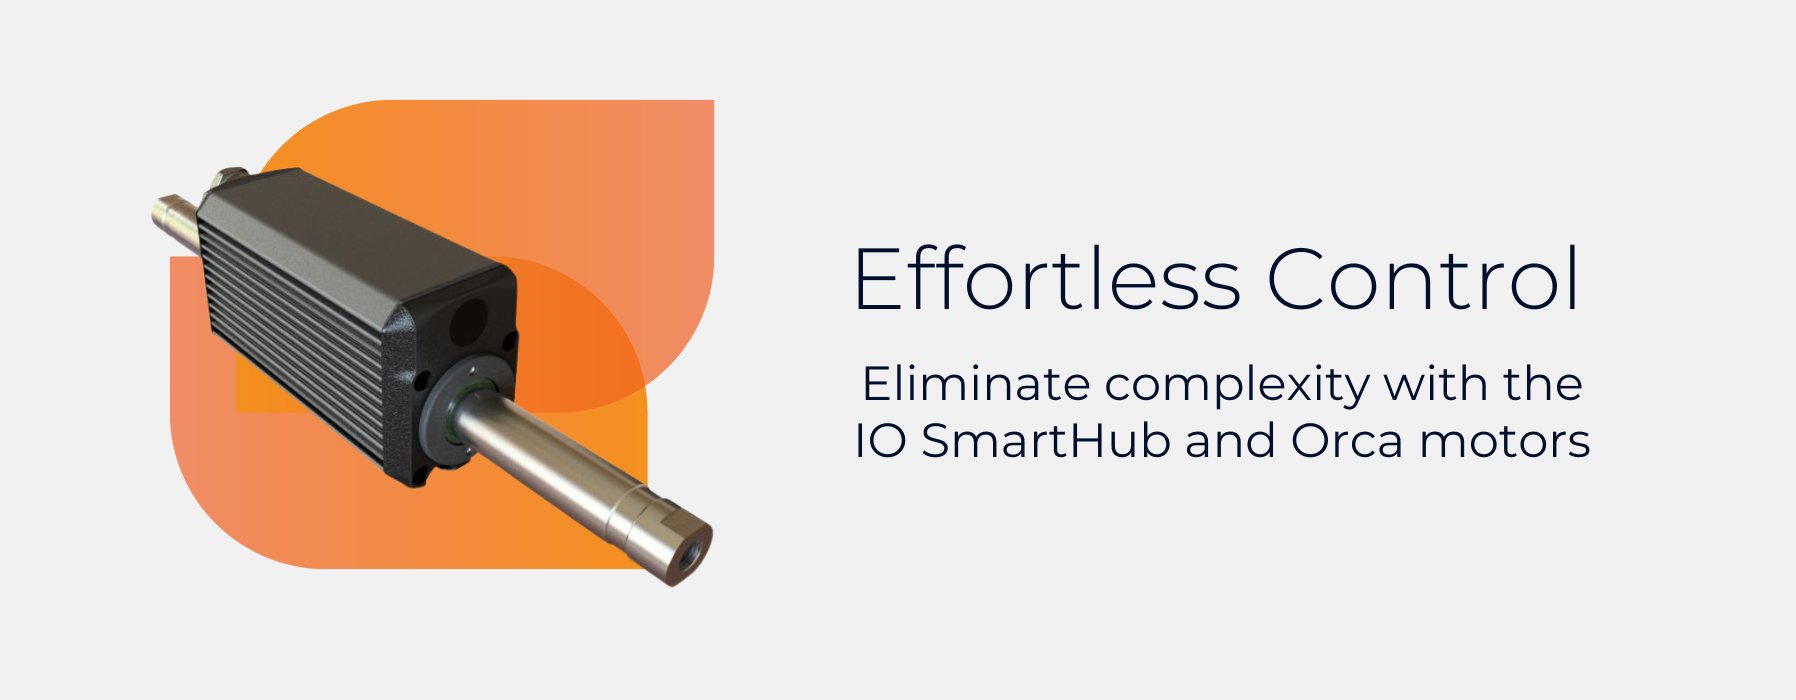 Effortless Control with Orca and IO SmartHub Banner